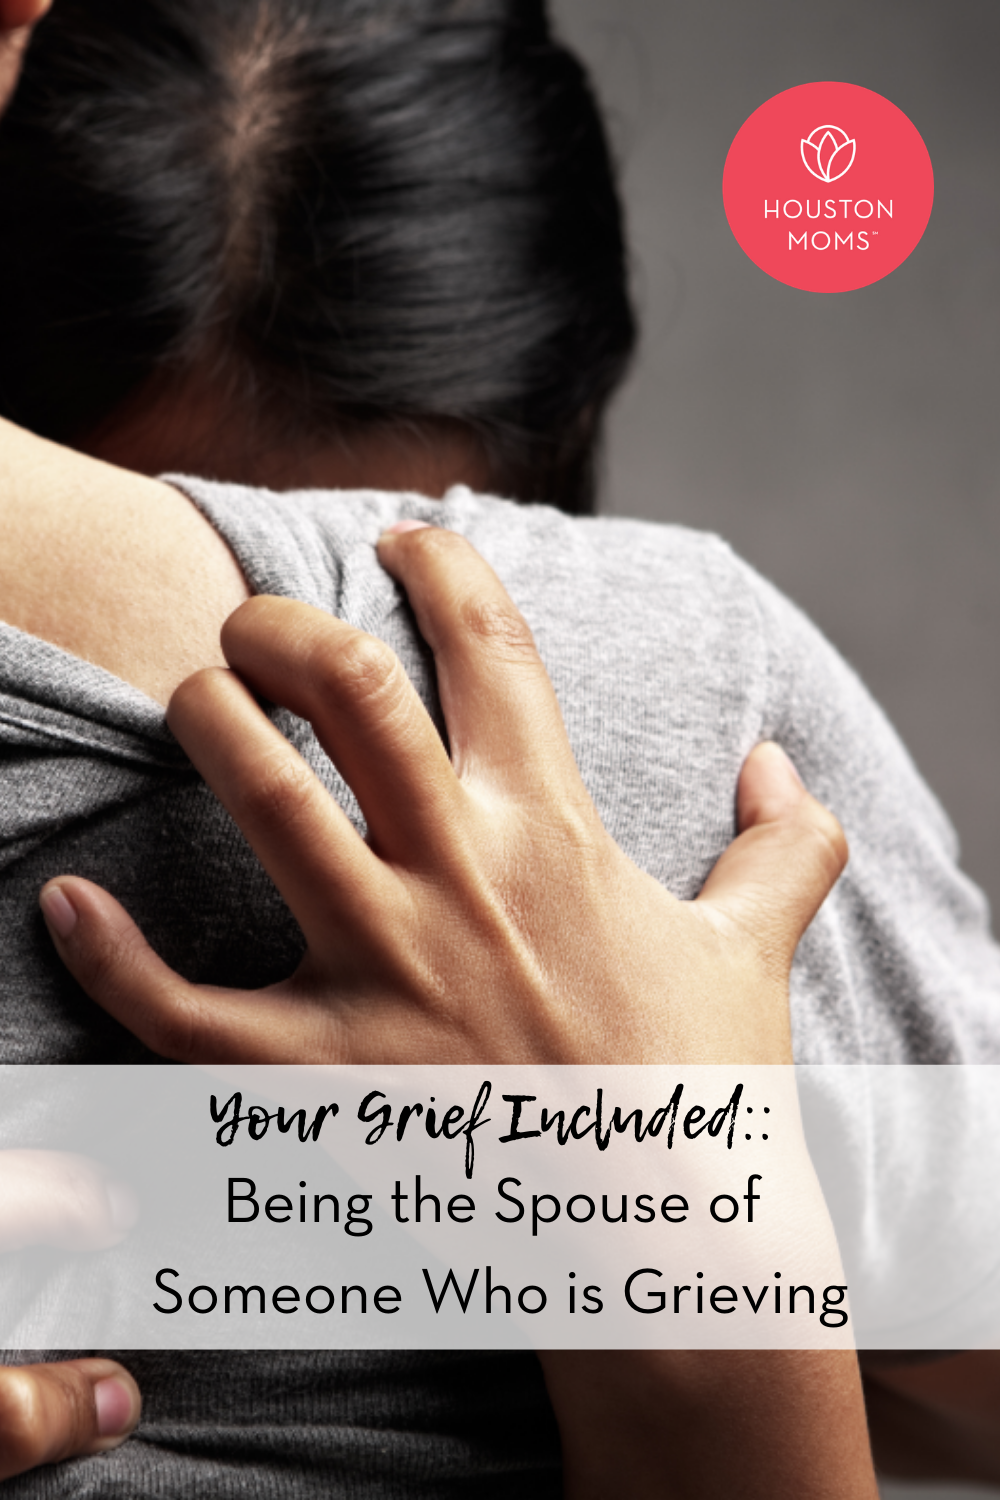 Houston Moms "Your Grief Included:: Being the Spouse of Someone Who is Grieving" #houstonmoms #houstonmomsblog #momsaroundhouston